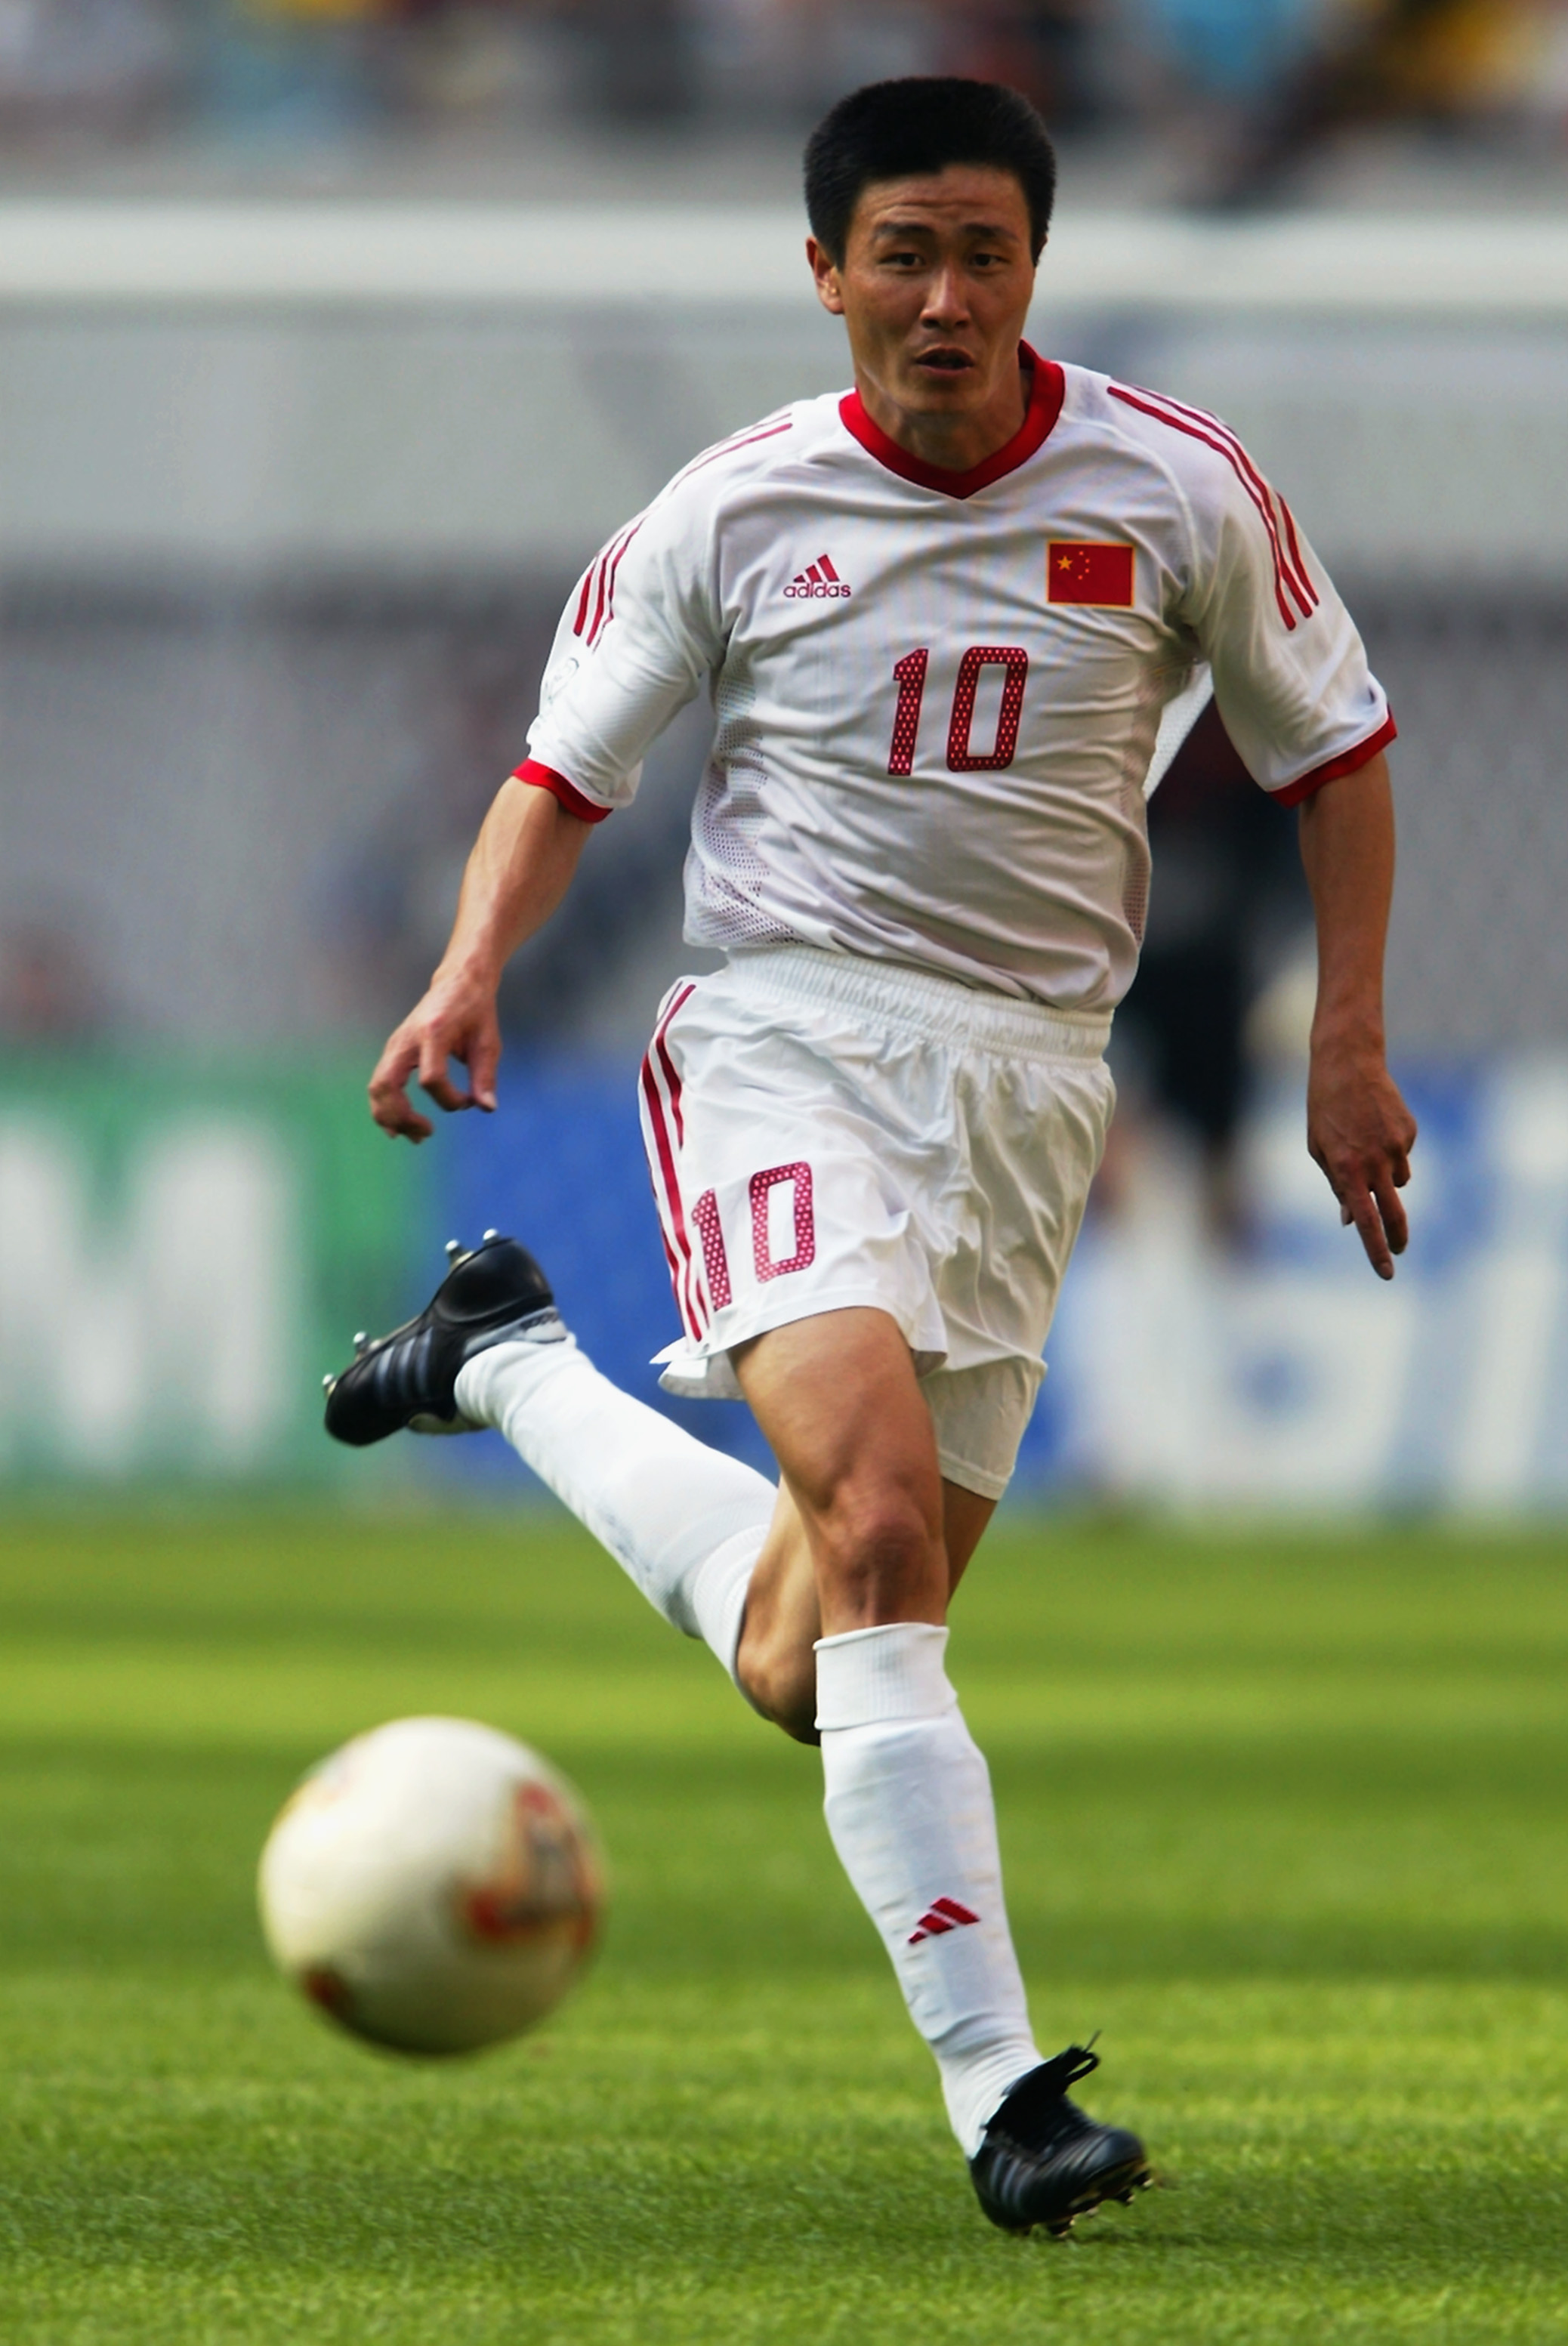 SEOUL - JUNE 13:  Haidong Hao of China runs with the ball during the FIFA World Cup Finals 2002 Group C match between Turkey and China played at the Seoul World Cup Stadium, in Seoul, South Korea on June 13, 2002. Turkey won the match 3-0. DIGITAL IMAGE.